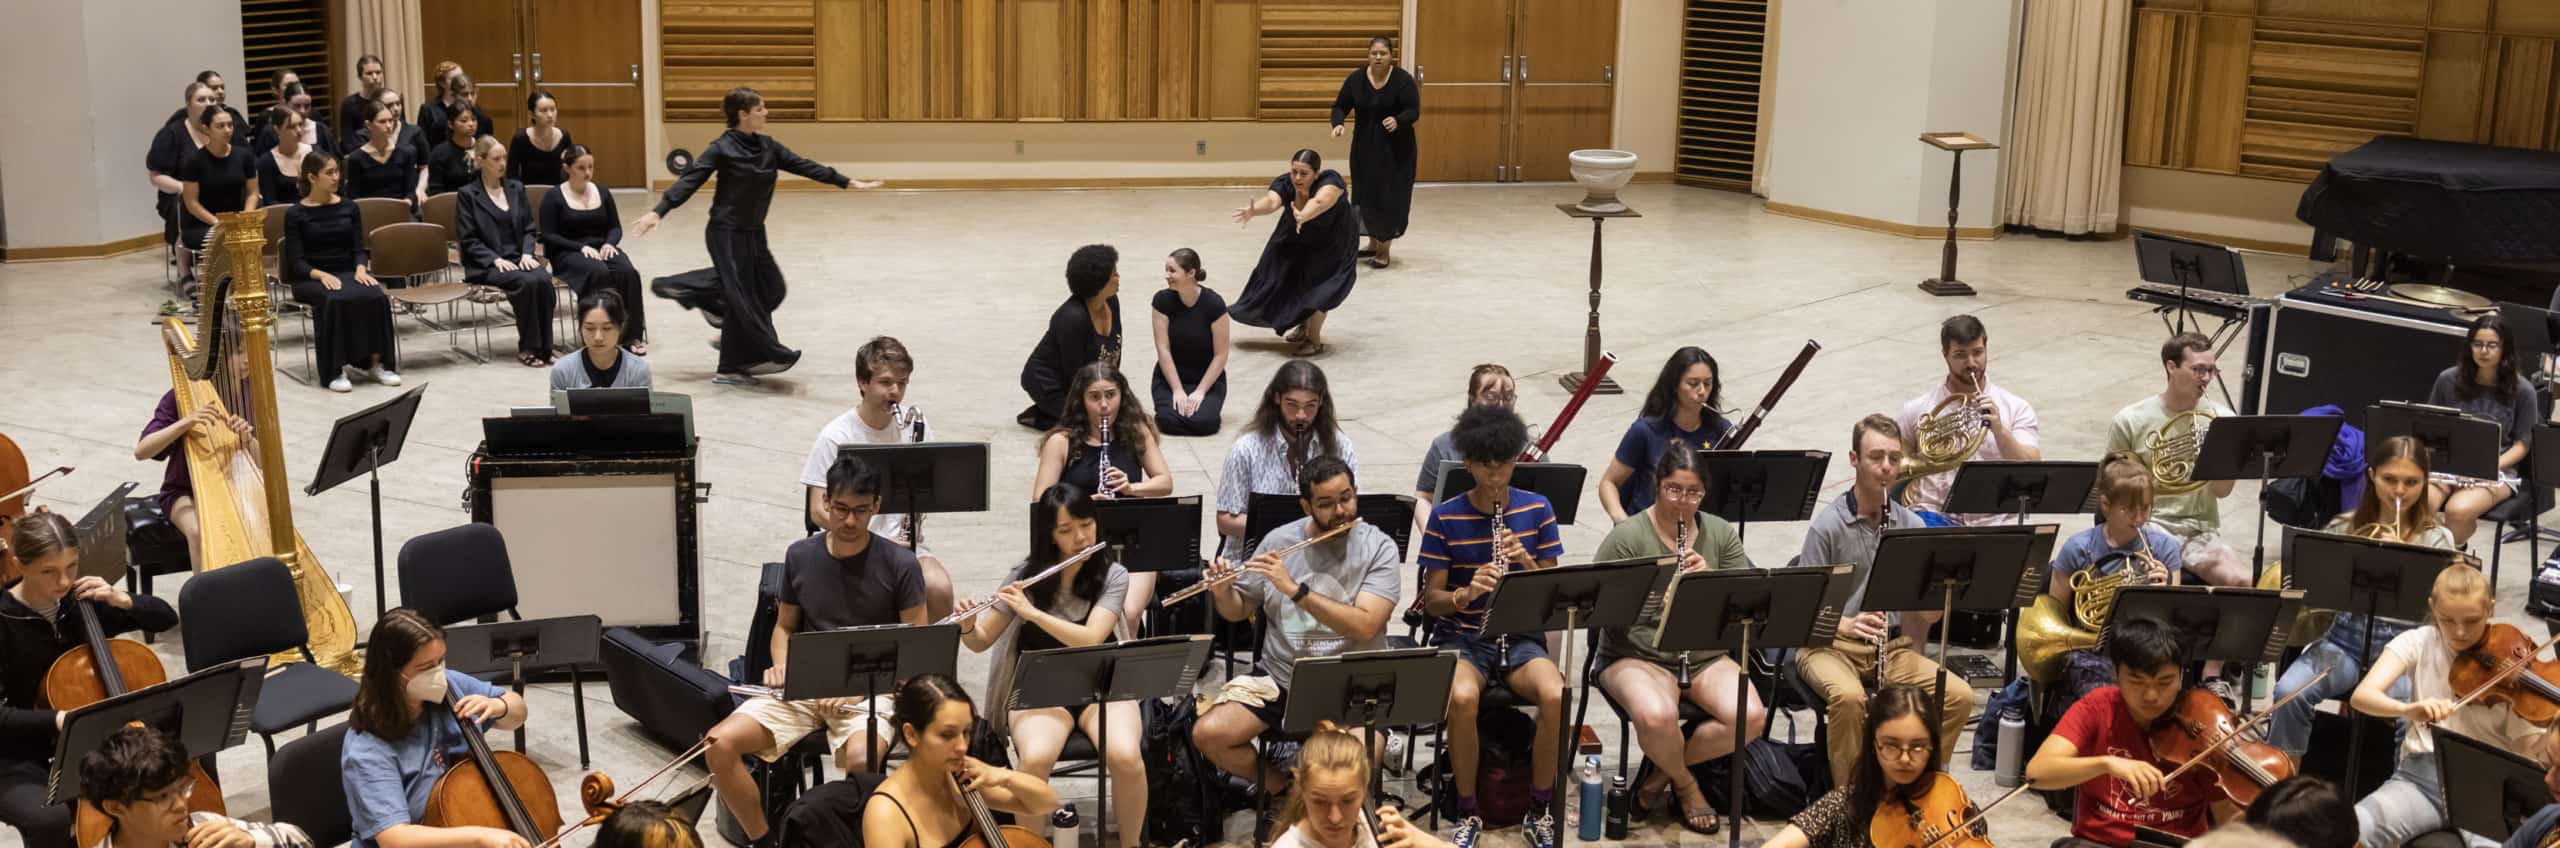 The Opera Conservatory rehearsing with the Music School Festival Orchestra